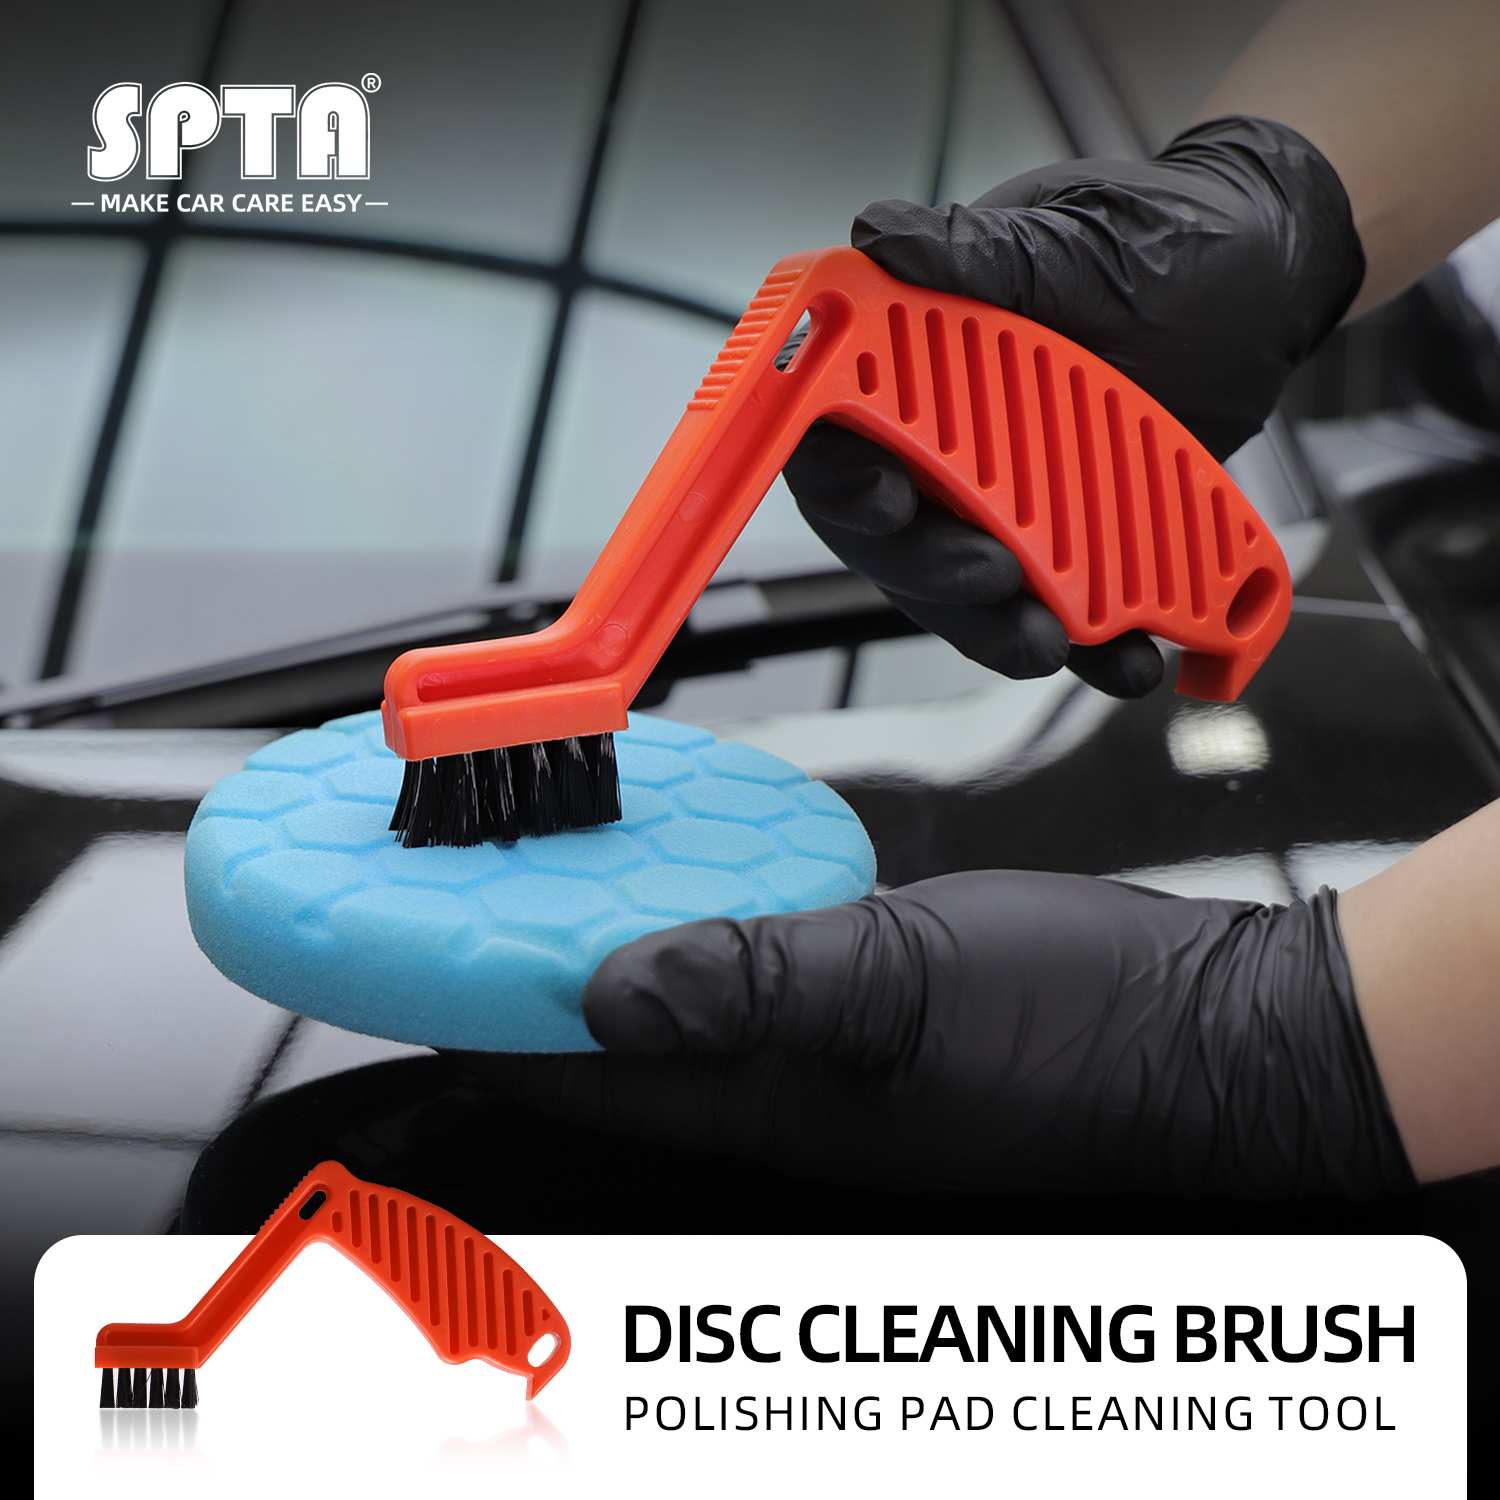 SPTA Polishing Disc Cleaning Brush Buffing Sponge Pads Cleaning Brush Remove Wax Residue Foam Pad Conditioning Tool